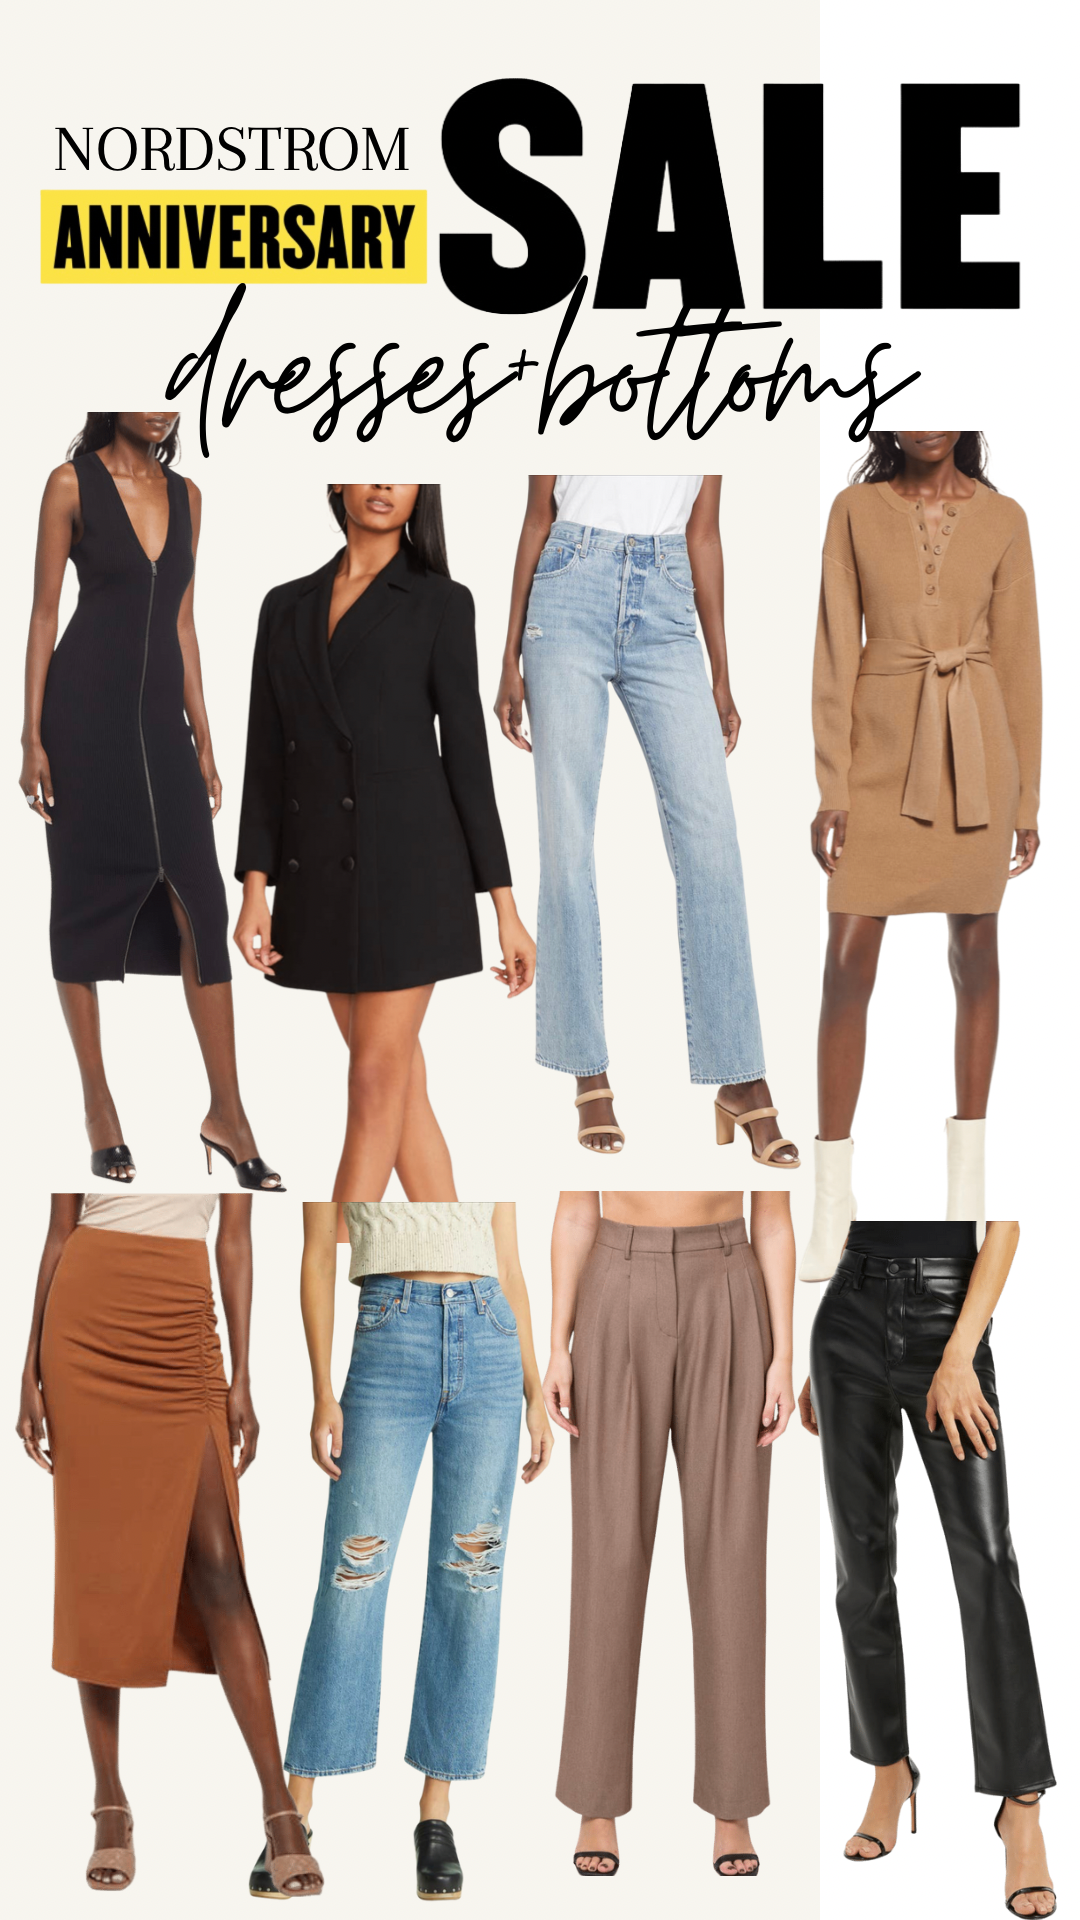 NORDSTROM ANNIVERSARY SALE 2022-MY TOP PICKS-Jaclyn De Leon Style. This years nordtroms top picks in different categories. Jackets, shoes, sweaters, dresses, handbags/accessories, tops, activewear, home, beauty, and loungewear